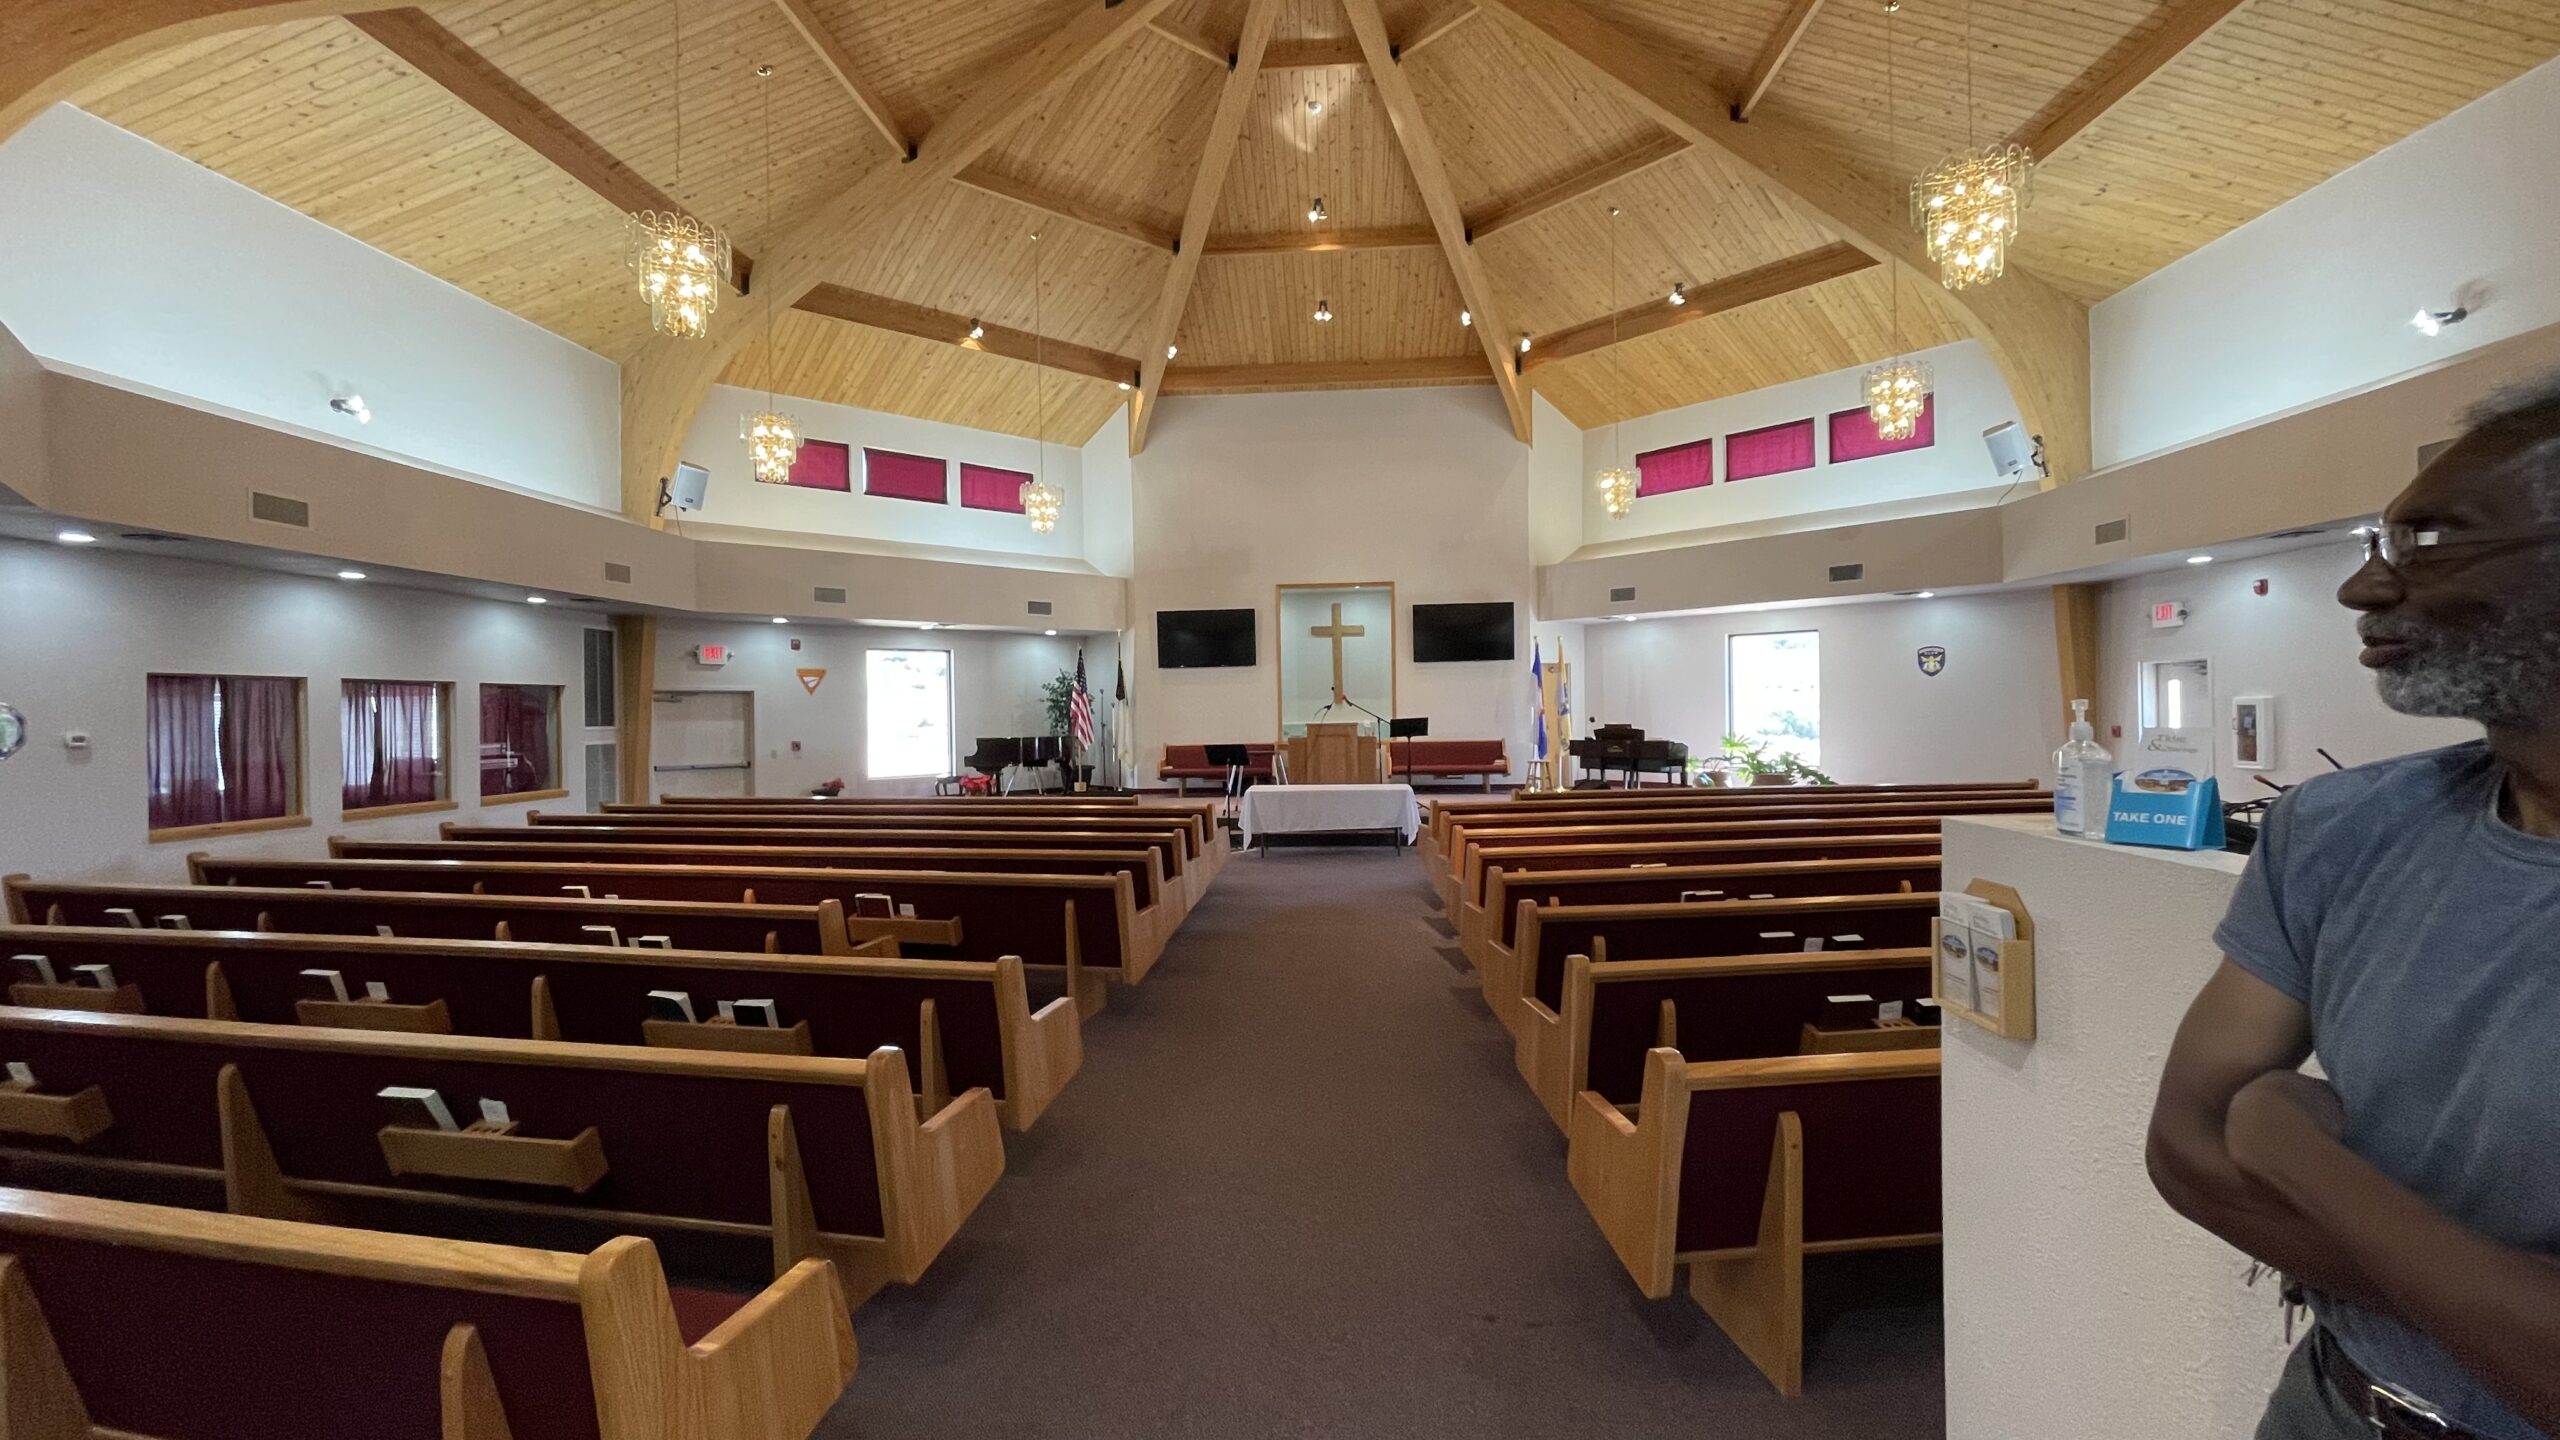 The church has a beautiful sanctuary where the Prophecy Revival meeting will be held.